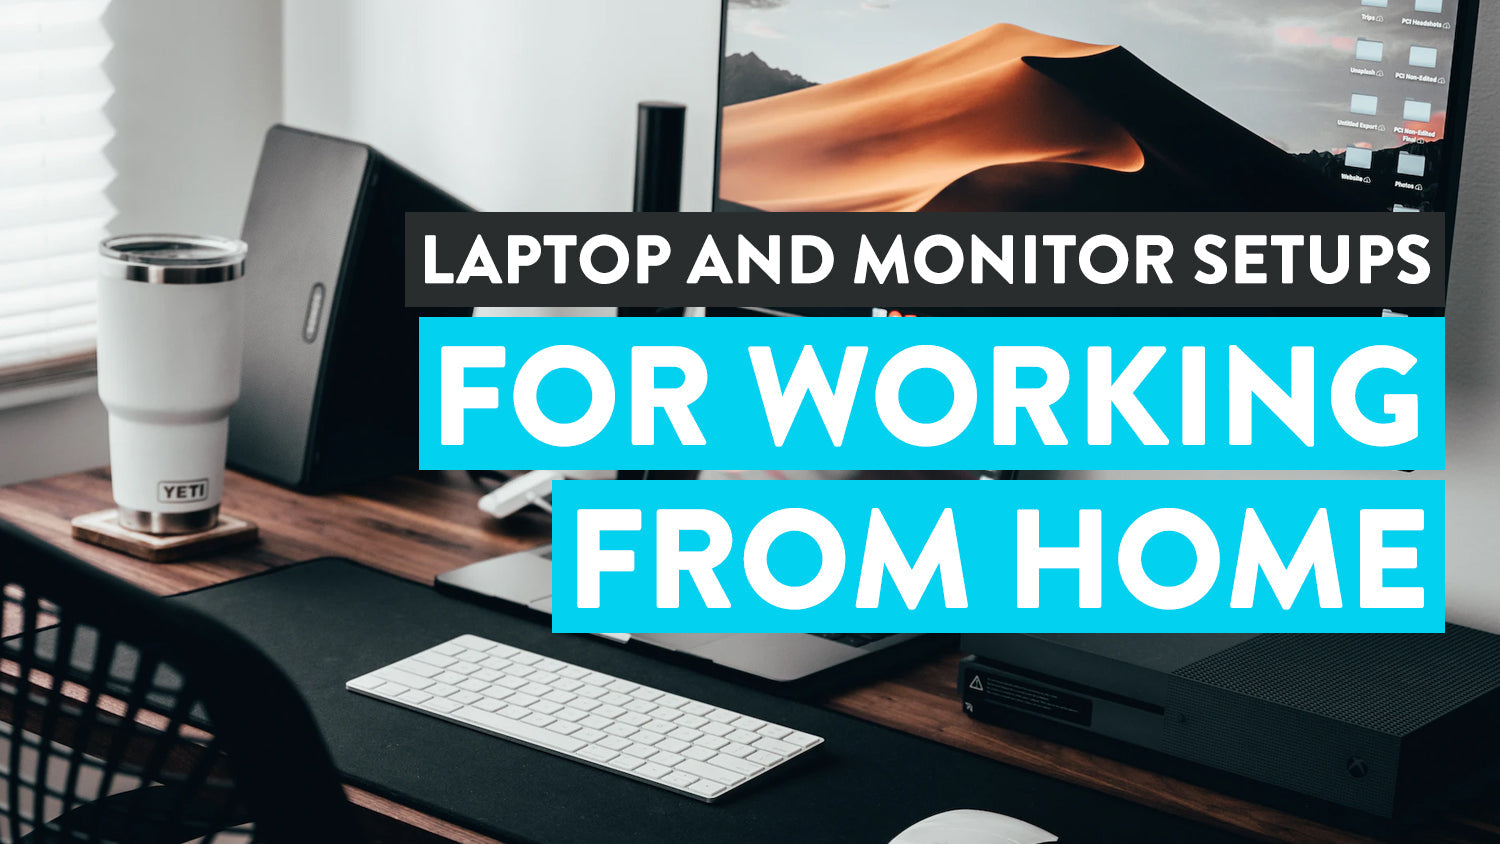 These workspace accessories give you ergonomic organization